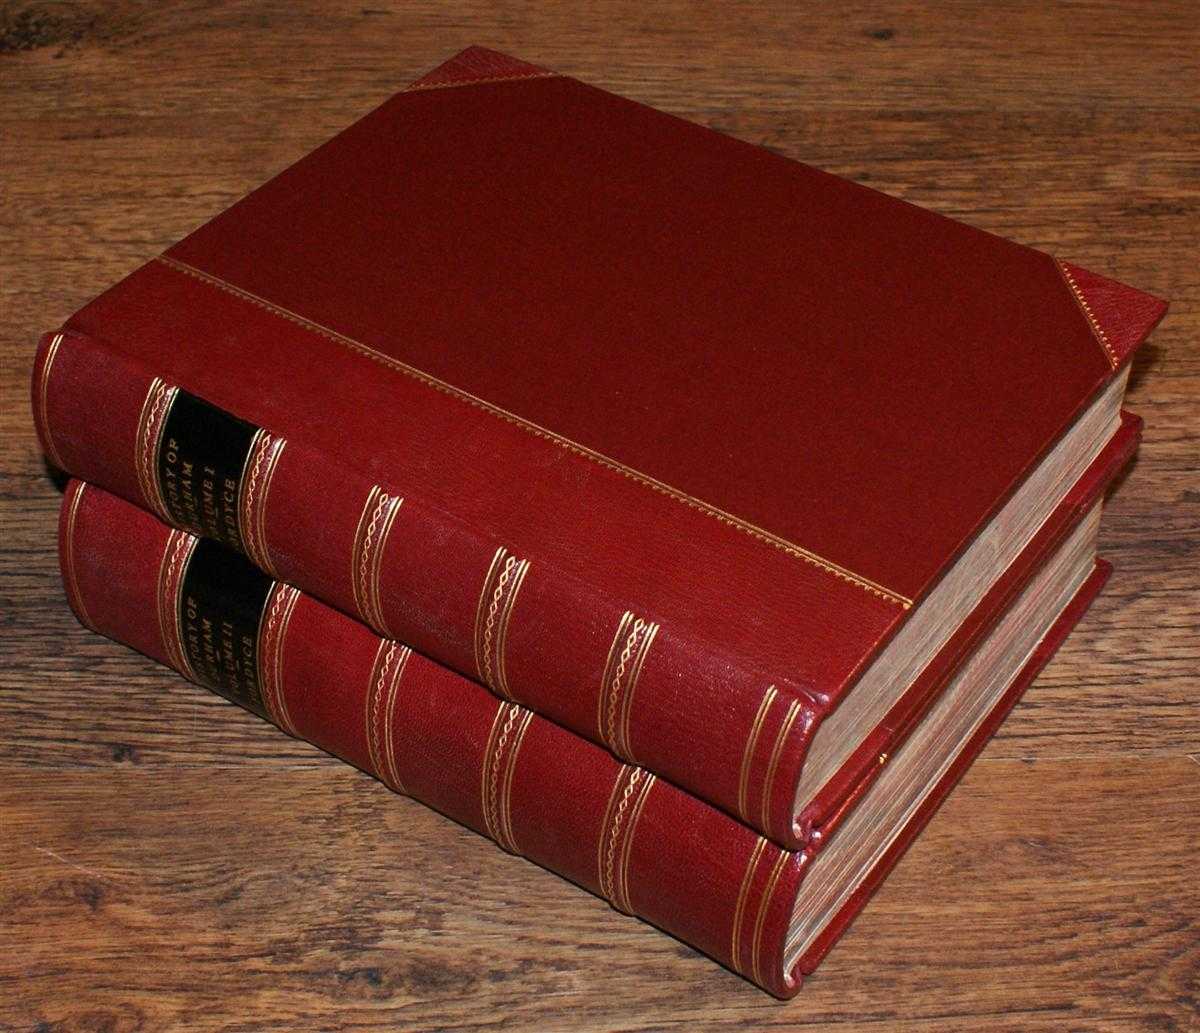 William Fordyce - The History and Antiquities of the County Palatine of Durham; Comprising a Condensed Account of its Natural, Civil, and Ecclesiastical History from the Earliest Period to the Present Time; etc. Complete in 2 Volumes